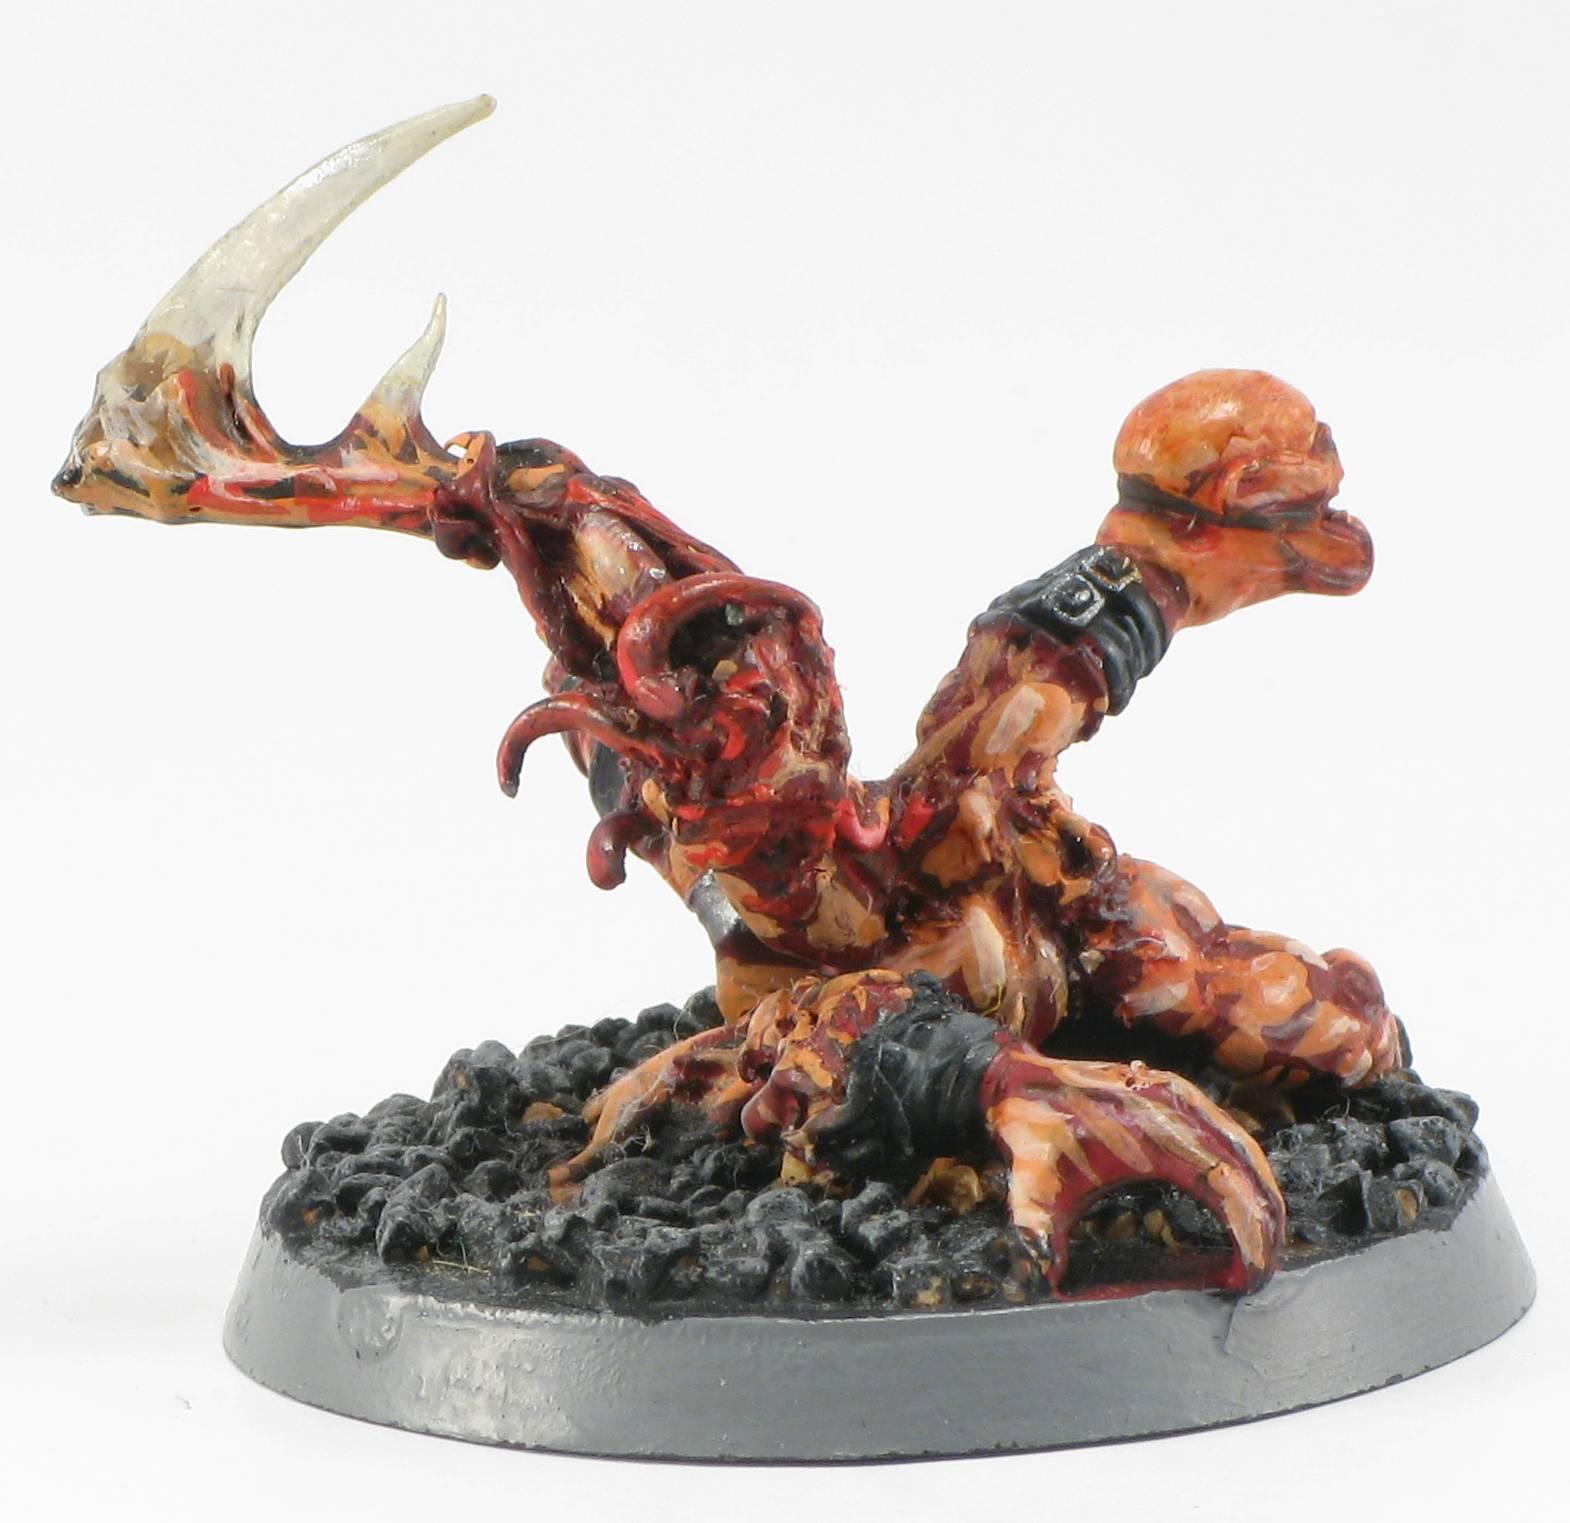 Chaos Daemons, Chaos Spawn, Fiends